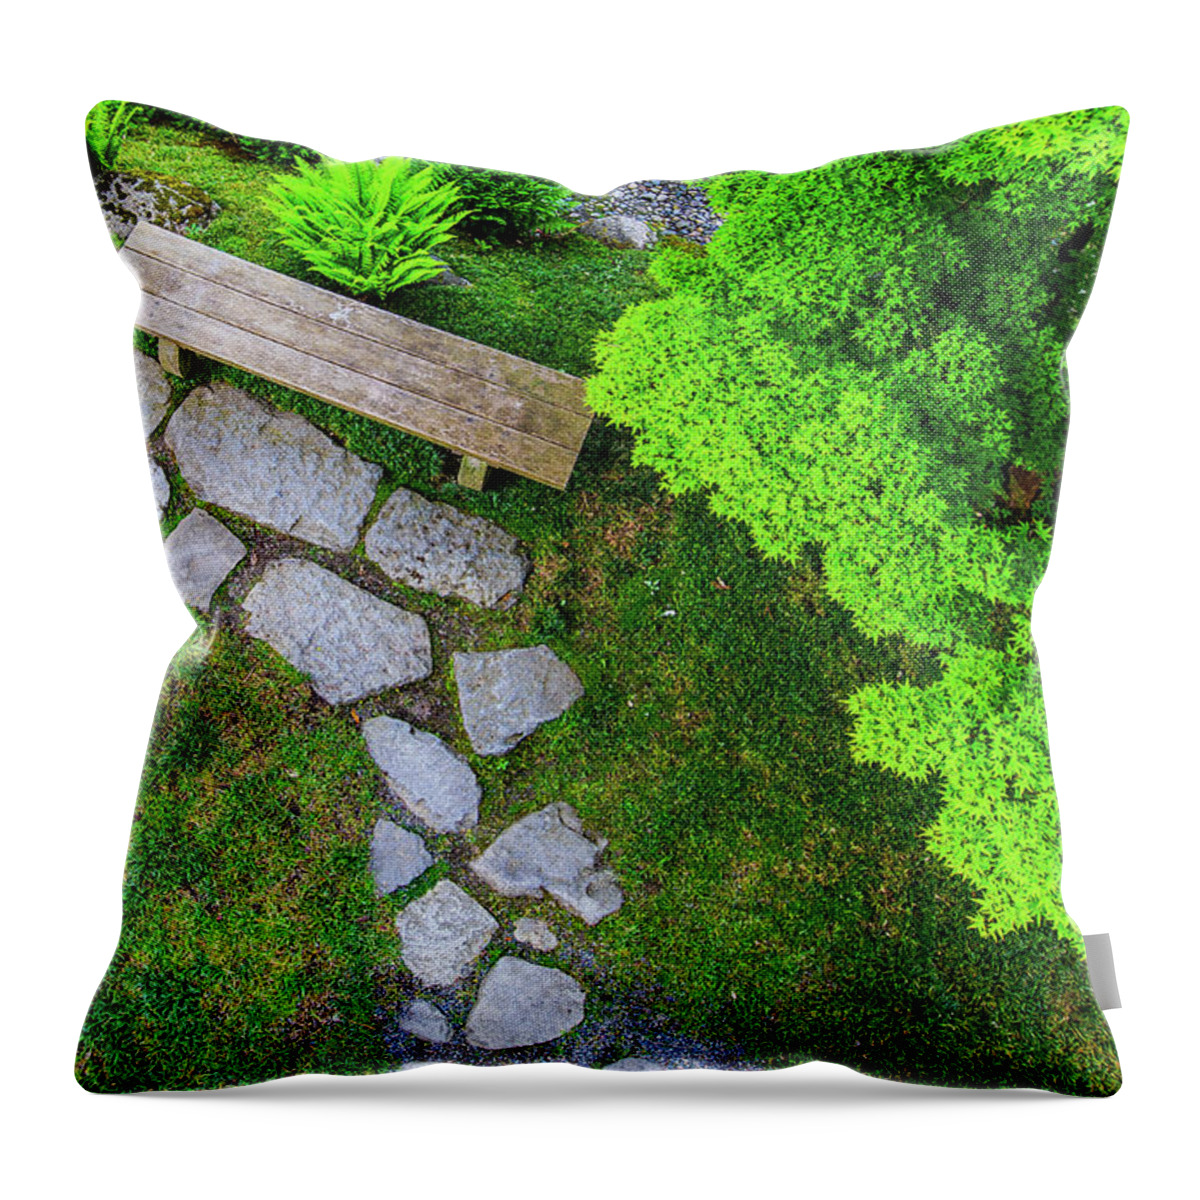 Japanese Garden Throw Pillow featuring the photograph Stepping Stones by Briand Sanderson